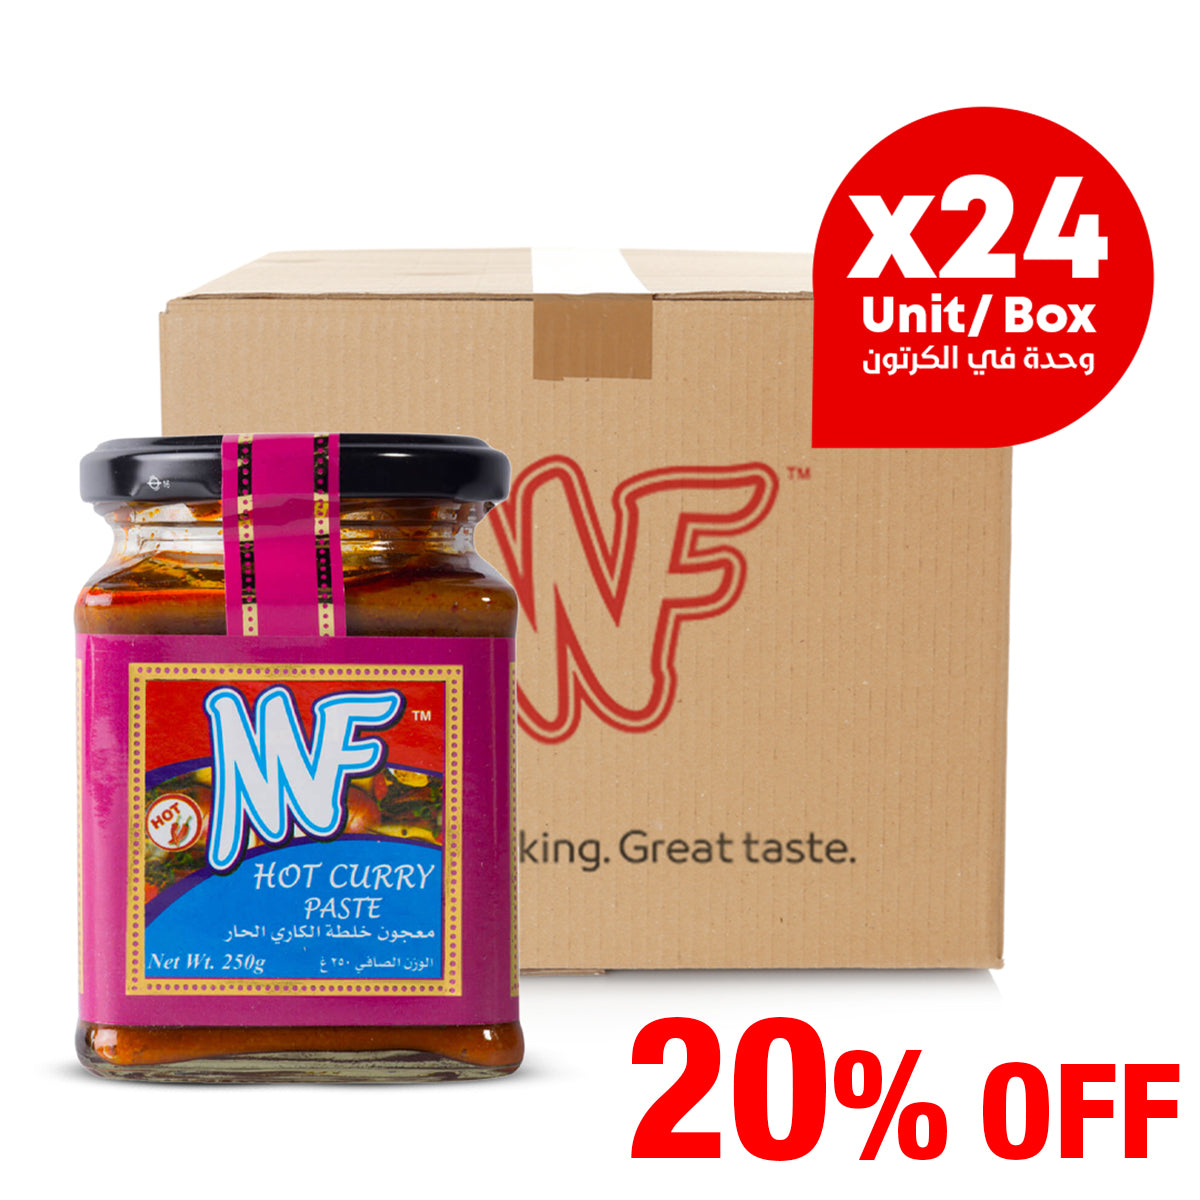 MF Hot Curry Paste 24x250g